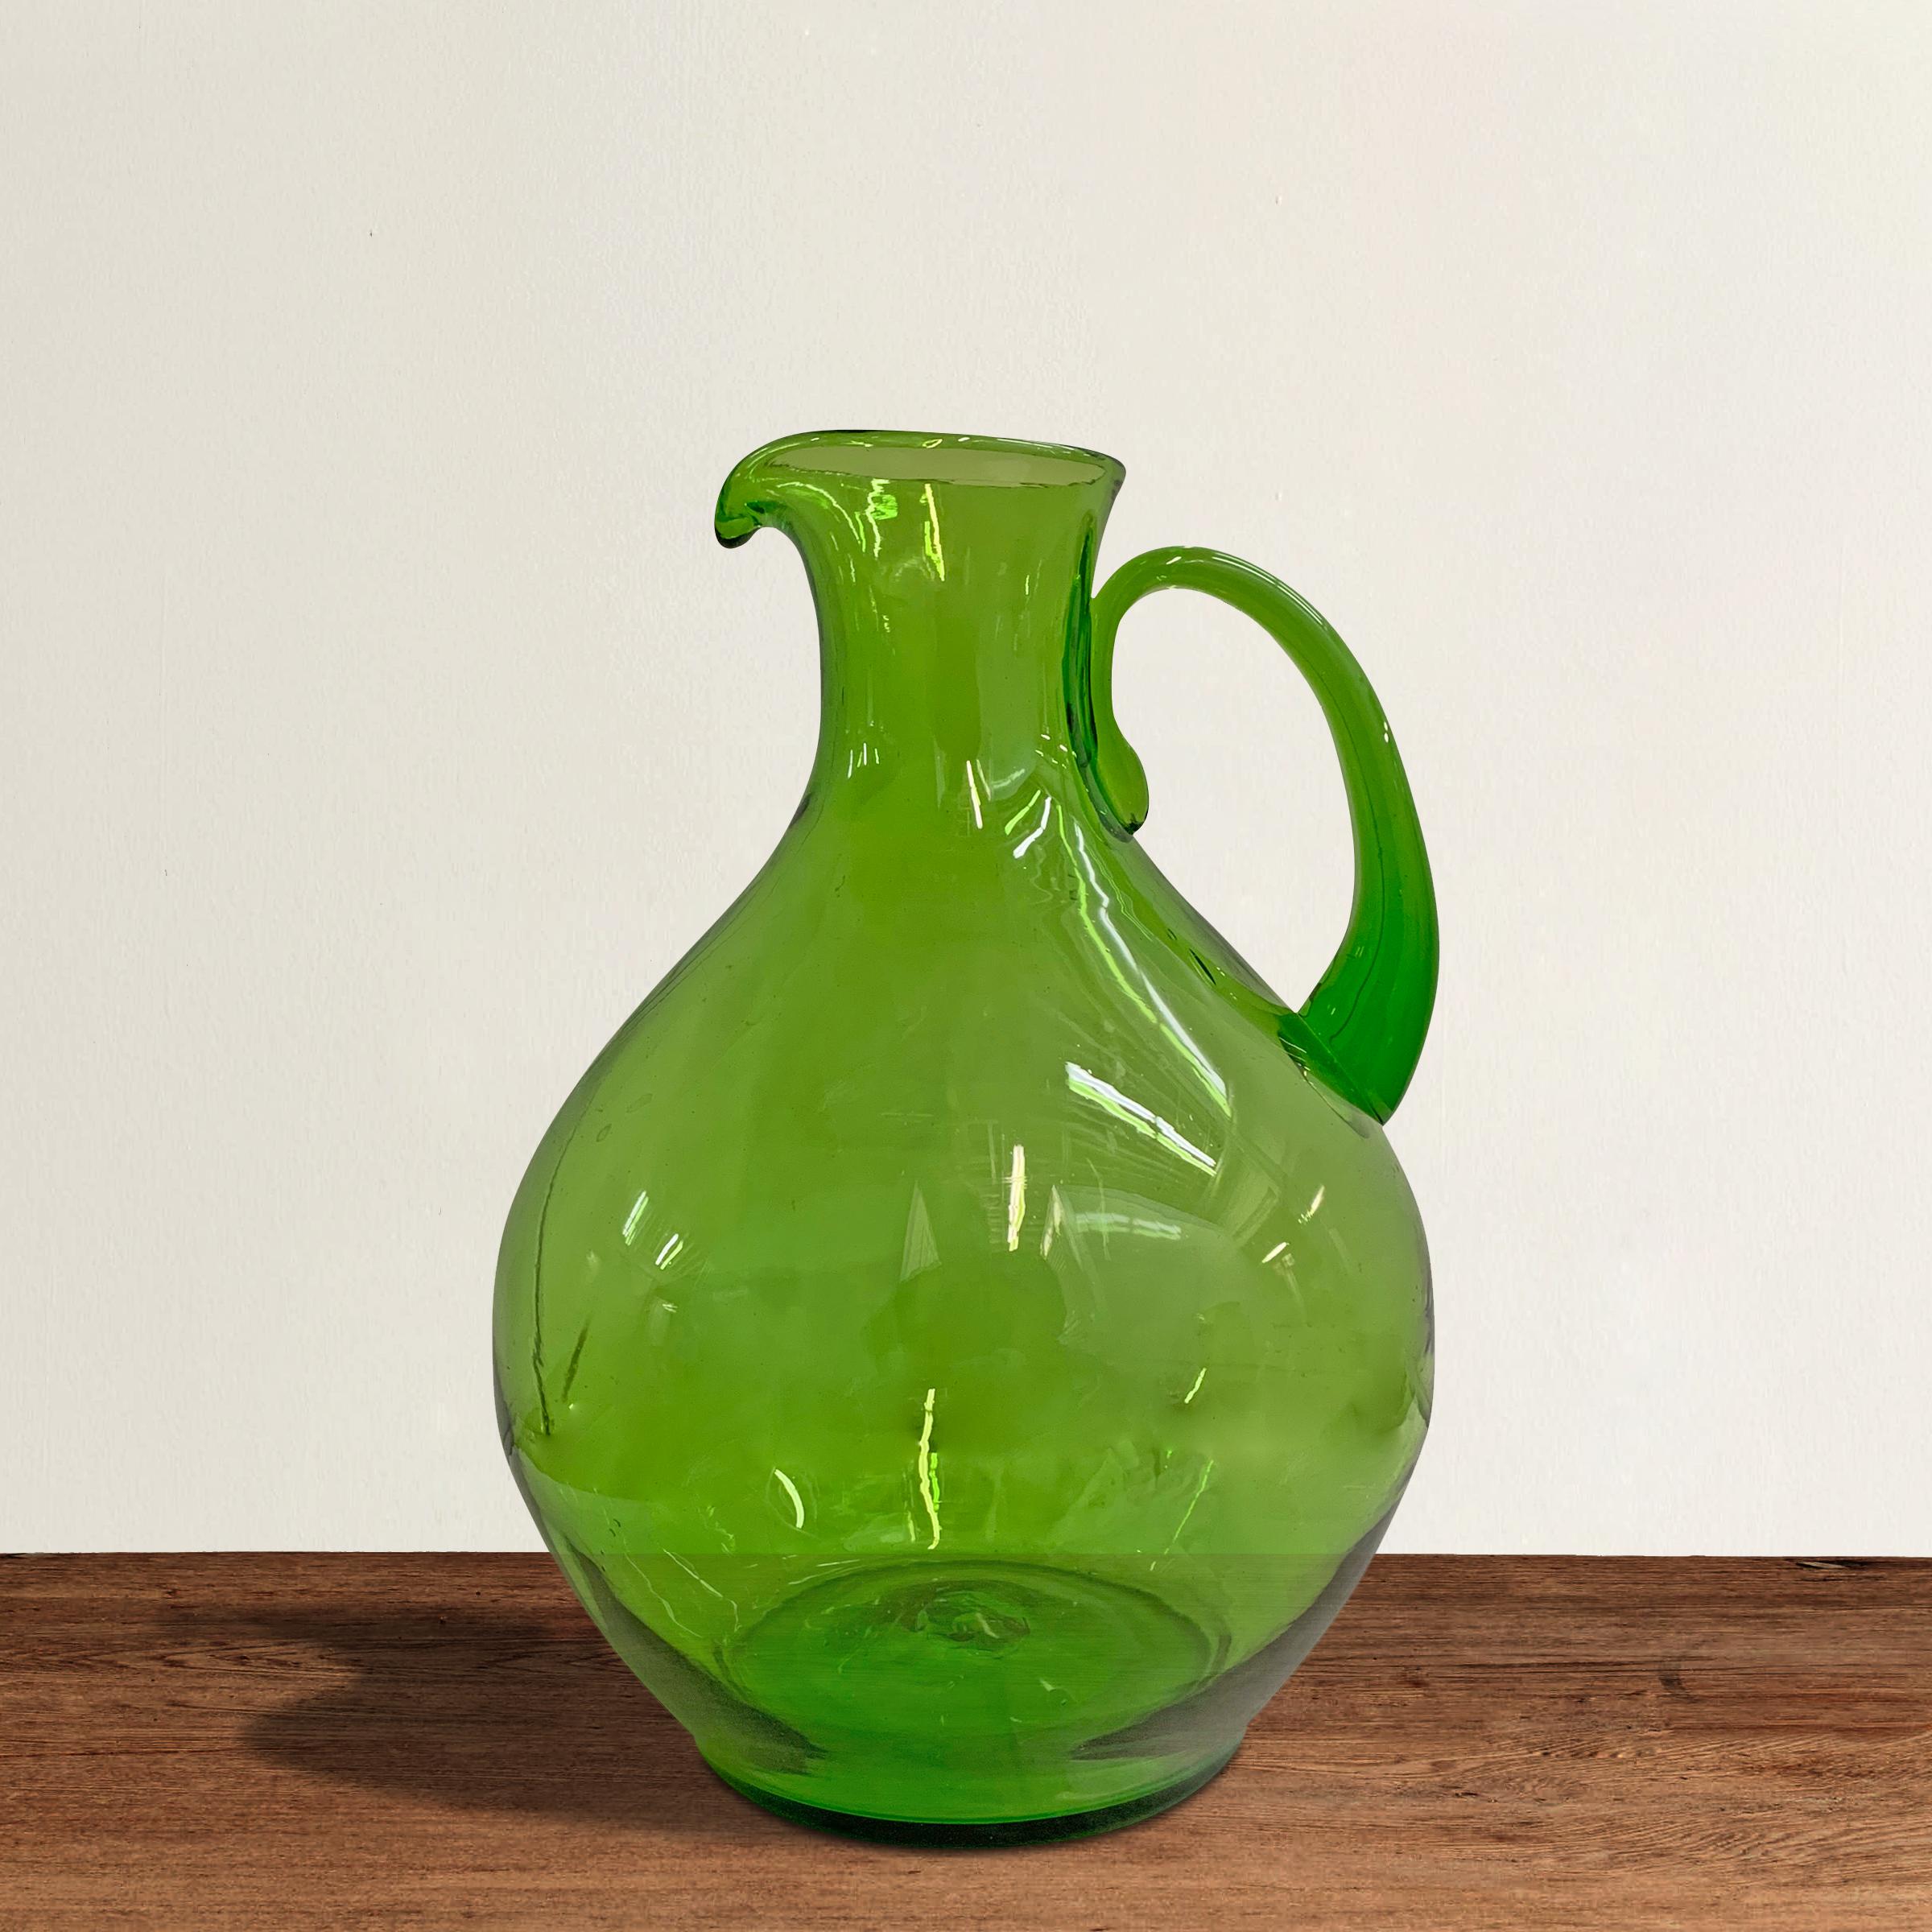 A rather large vintage hand blown green glass pitcher with a narrow neck and wide belly. Perfect as is, filled with flowers, or for serving your favorite libation at your next fête.